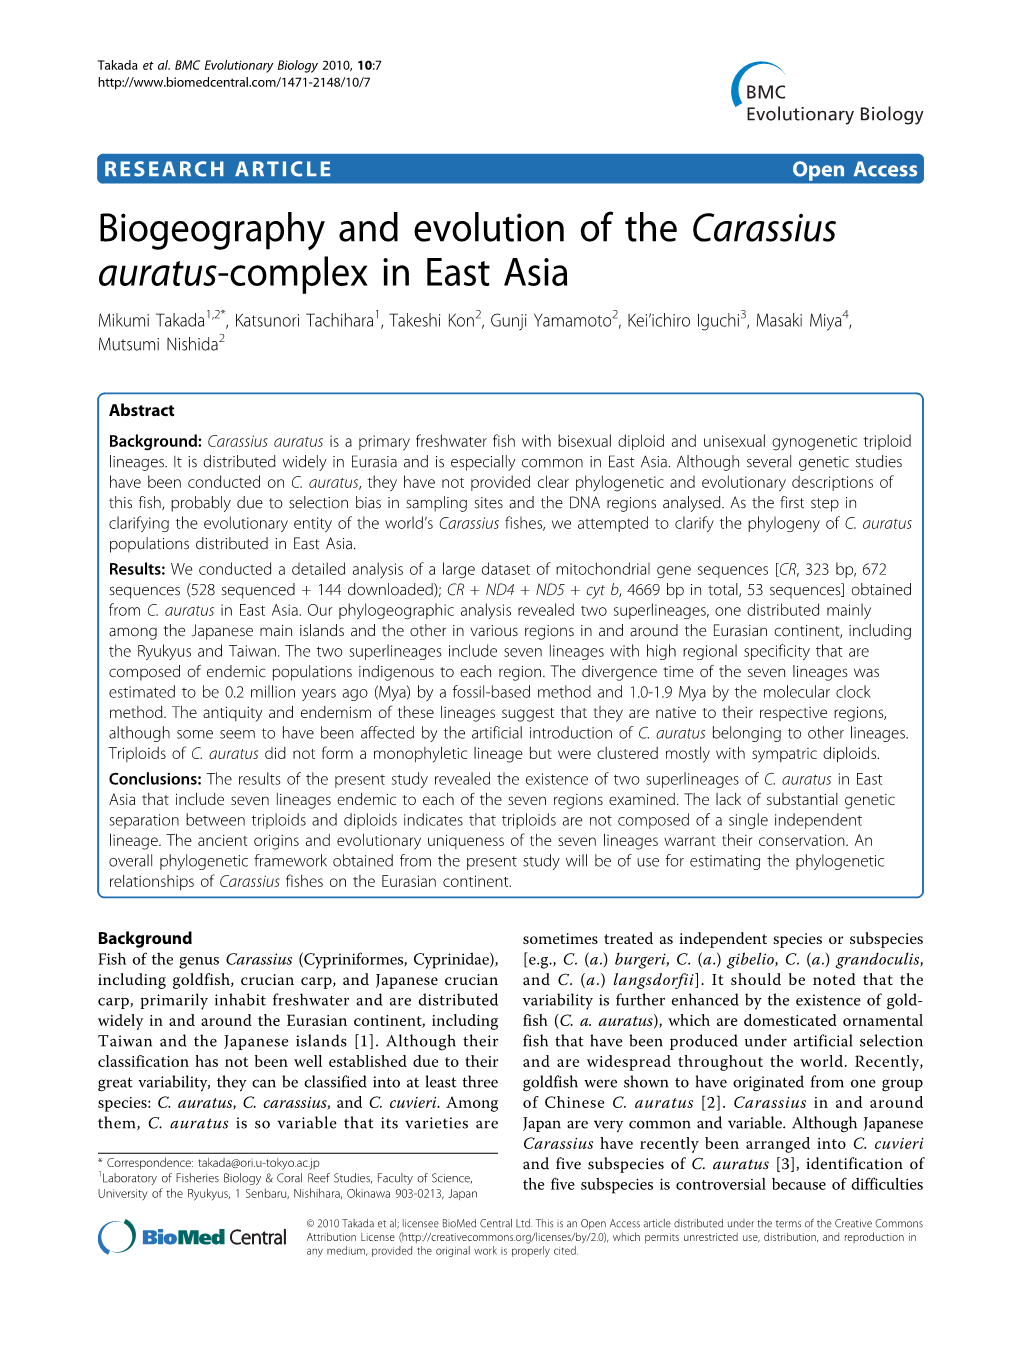 Biogeography and Evolution of the Carassius Auratus-Complex in East